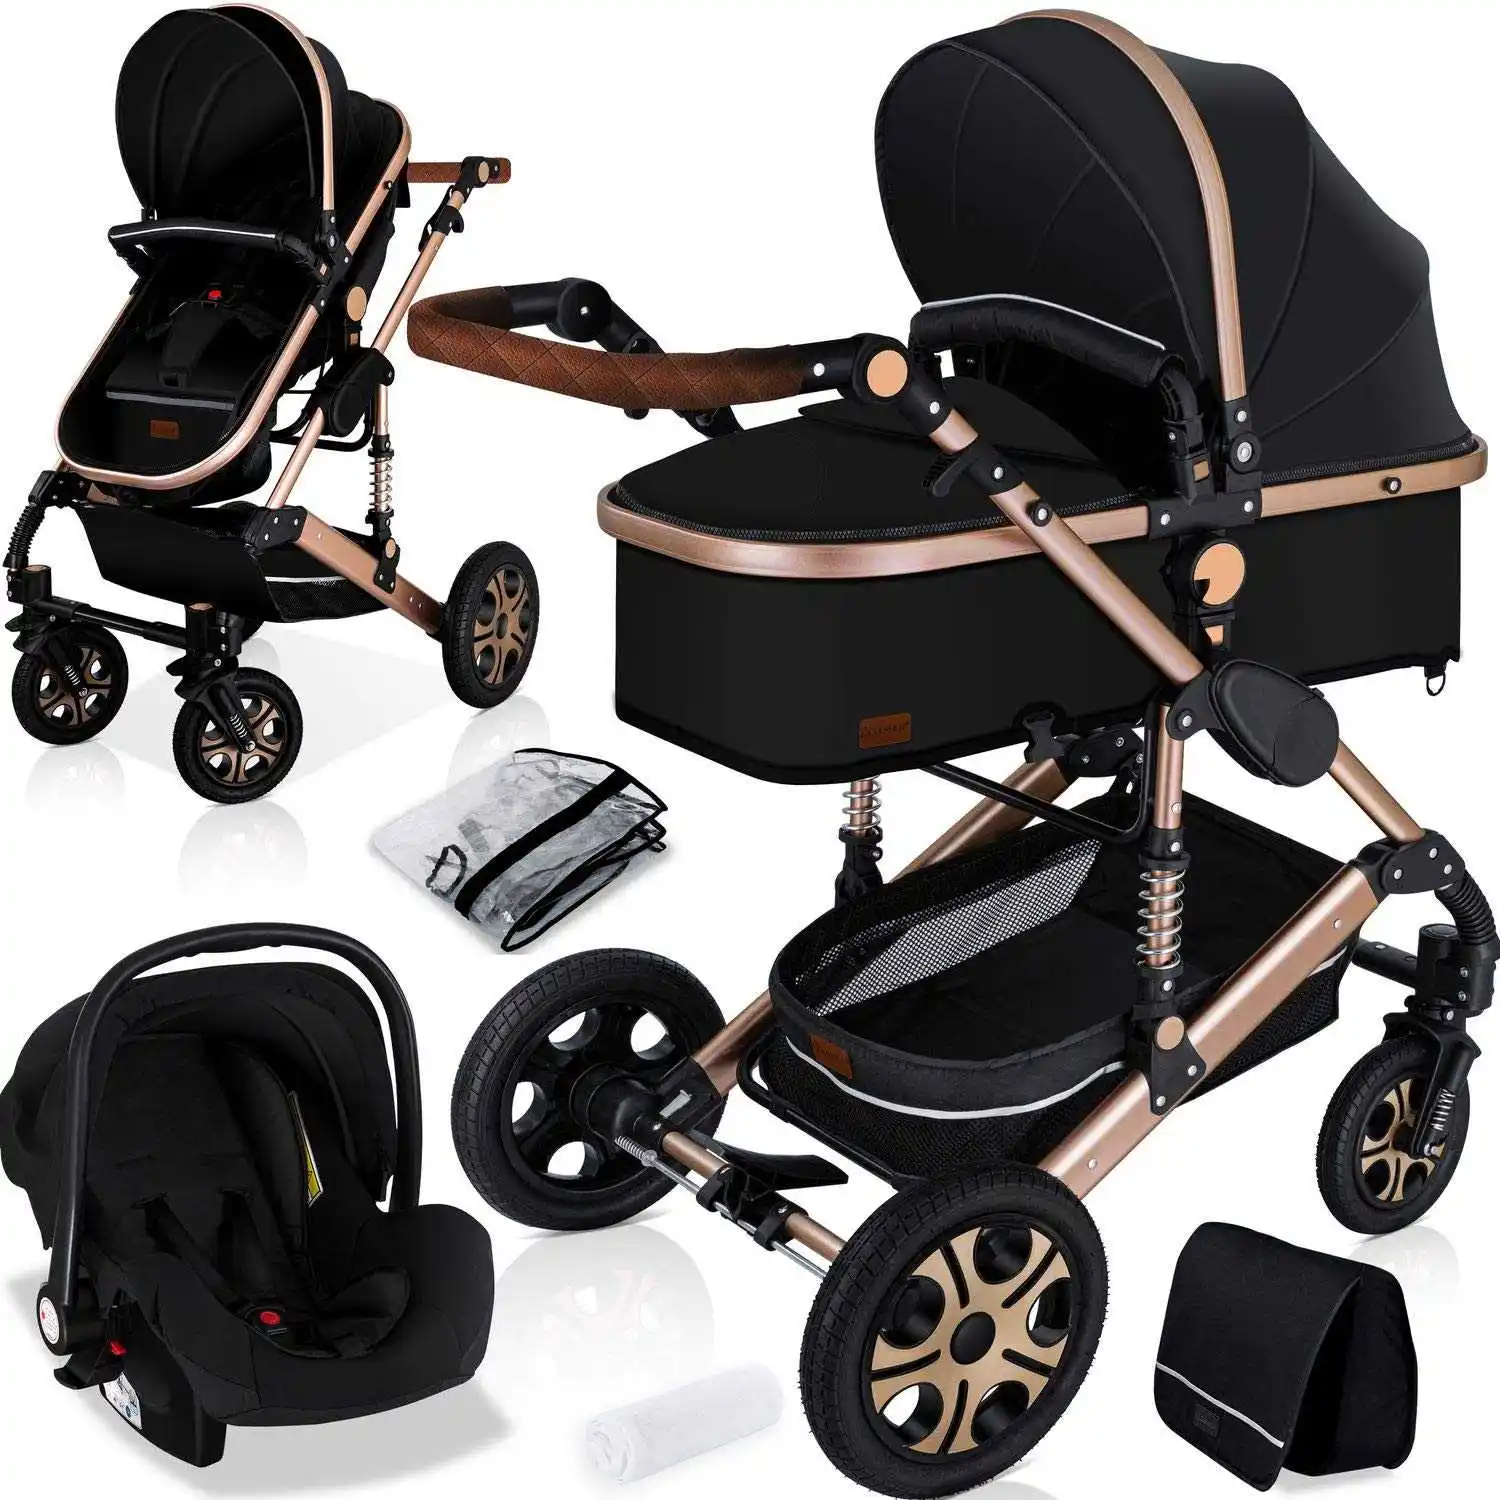 Modieuze Baby <span class=keywords><strong>Kinderwagen</strong></span> 3 In 1 Compacte <span class=keywords><strong>Kinderwagen</strong></span> Luxe <span class=keywords><strong>Kinderwagen</strong></span> Voor Pasgeboren